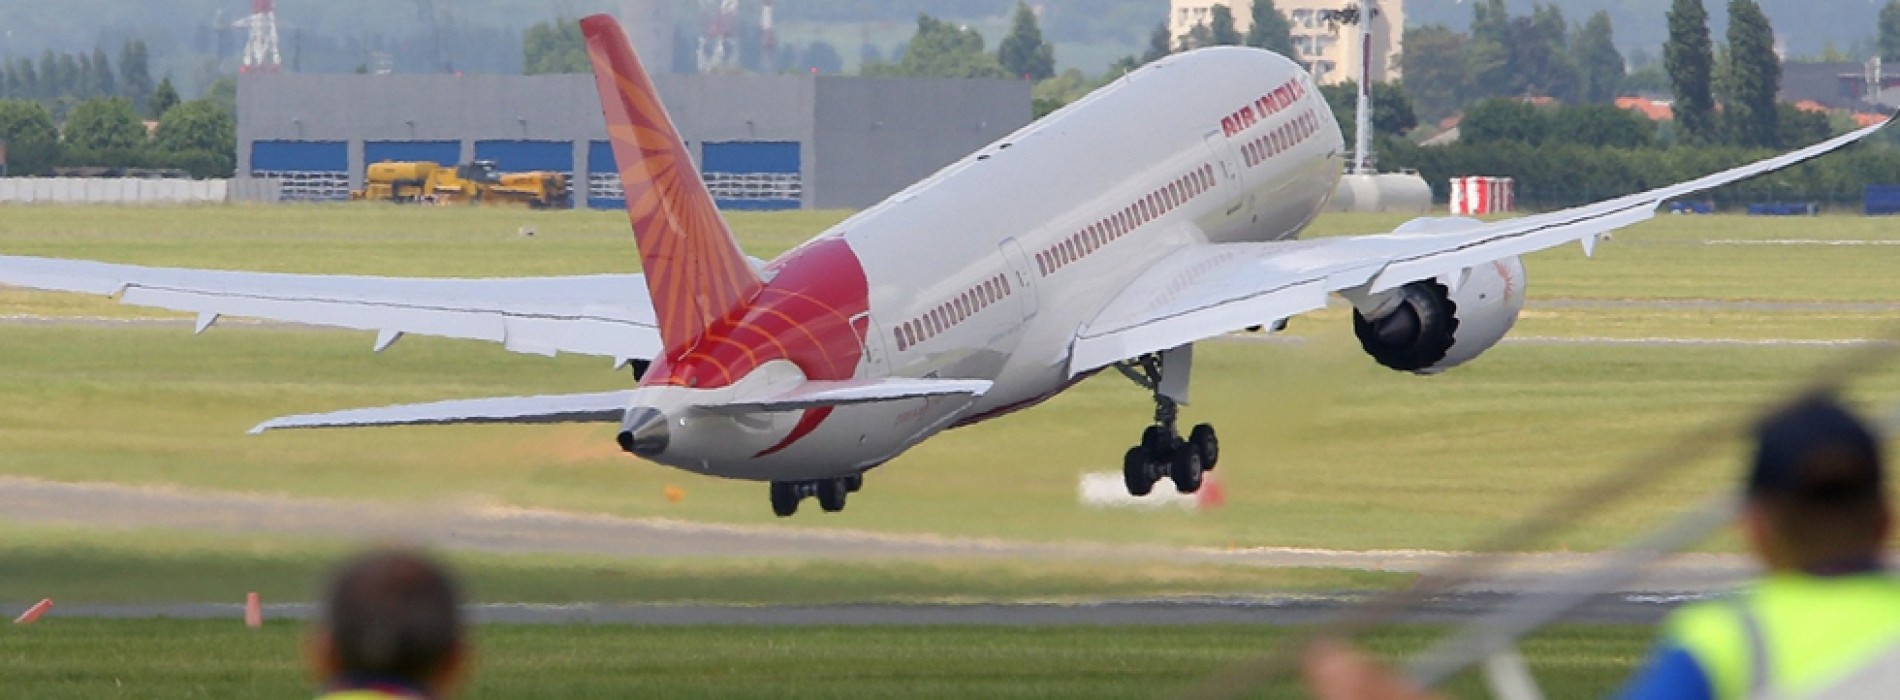 Parliamentary panel discusses issues related to Air India stake sale